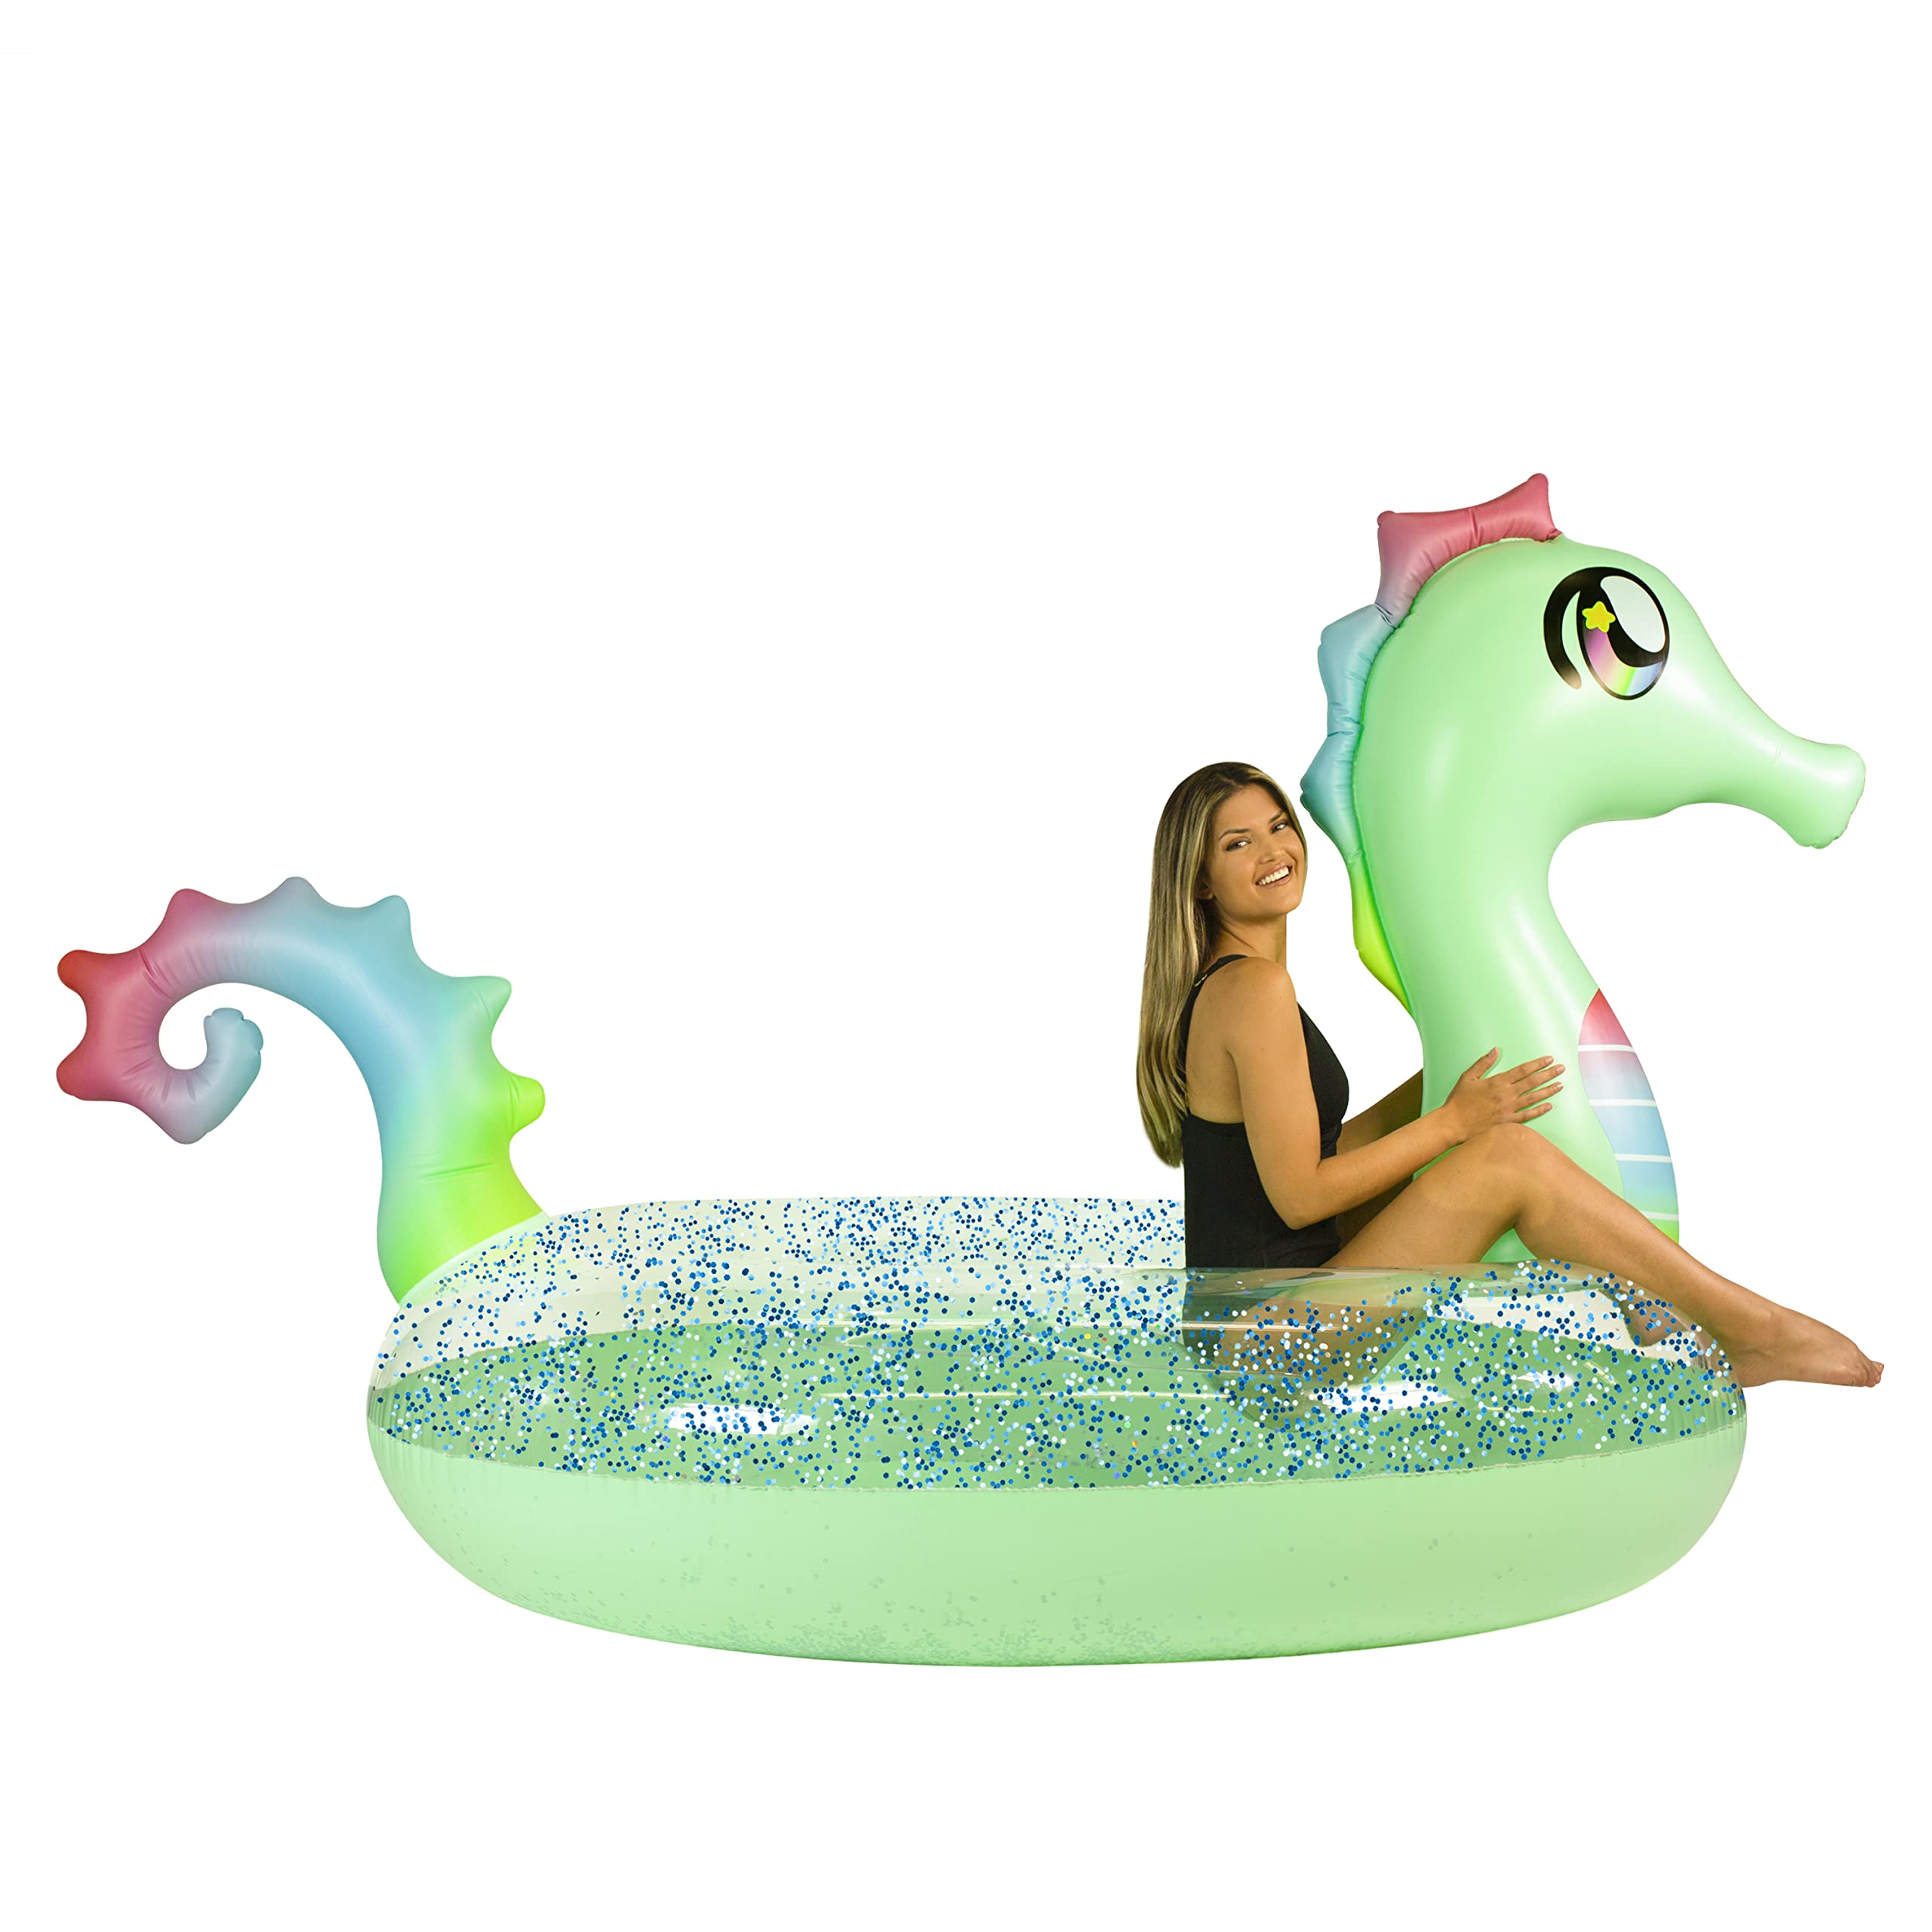 Glitter Seahorse Float - Gigantic 2 to 3 person